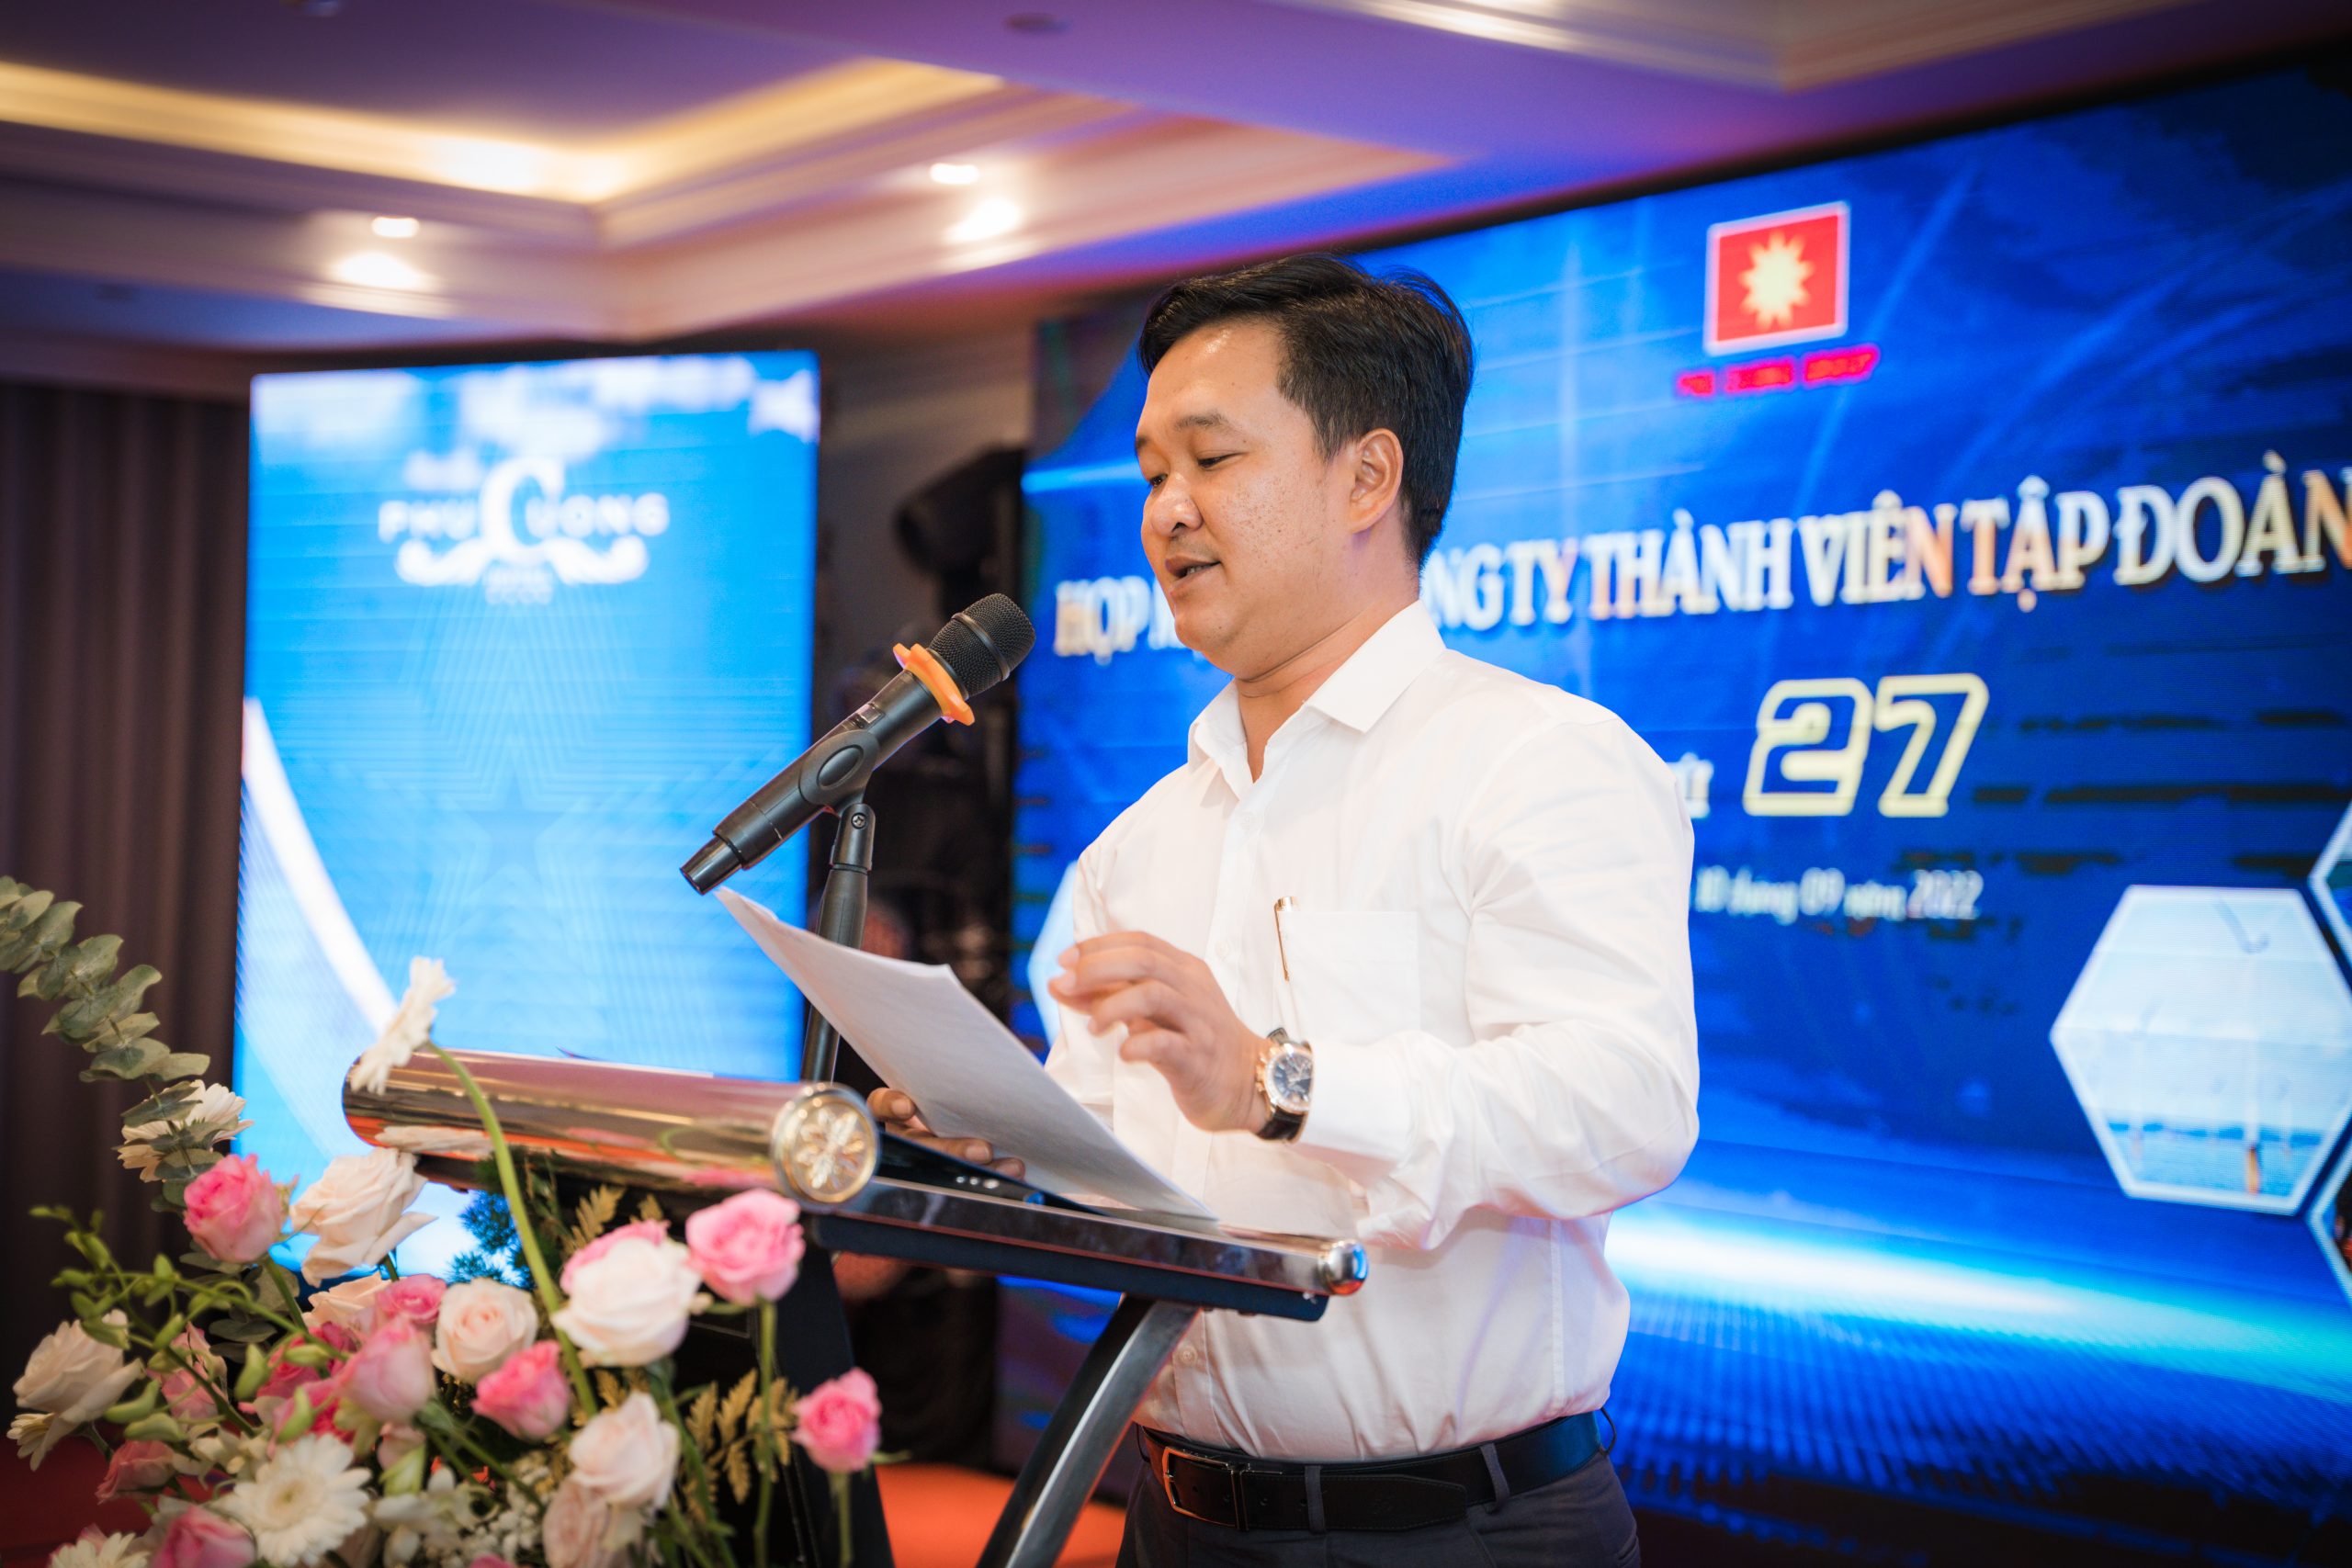 PHU CUONG SEAFOOD PARTICIPATES IN THE GROUP SYSTEM - Phu Cuong Seafood